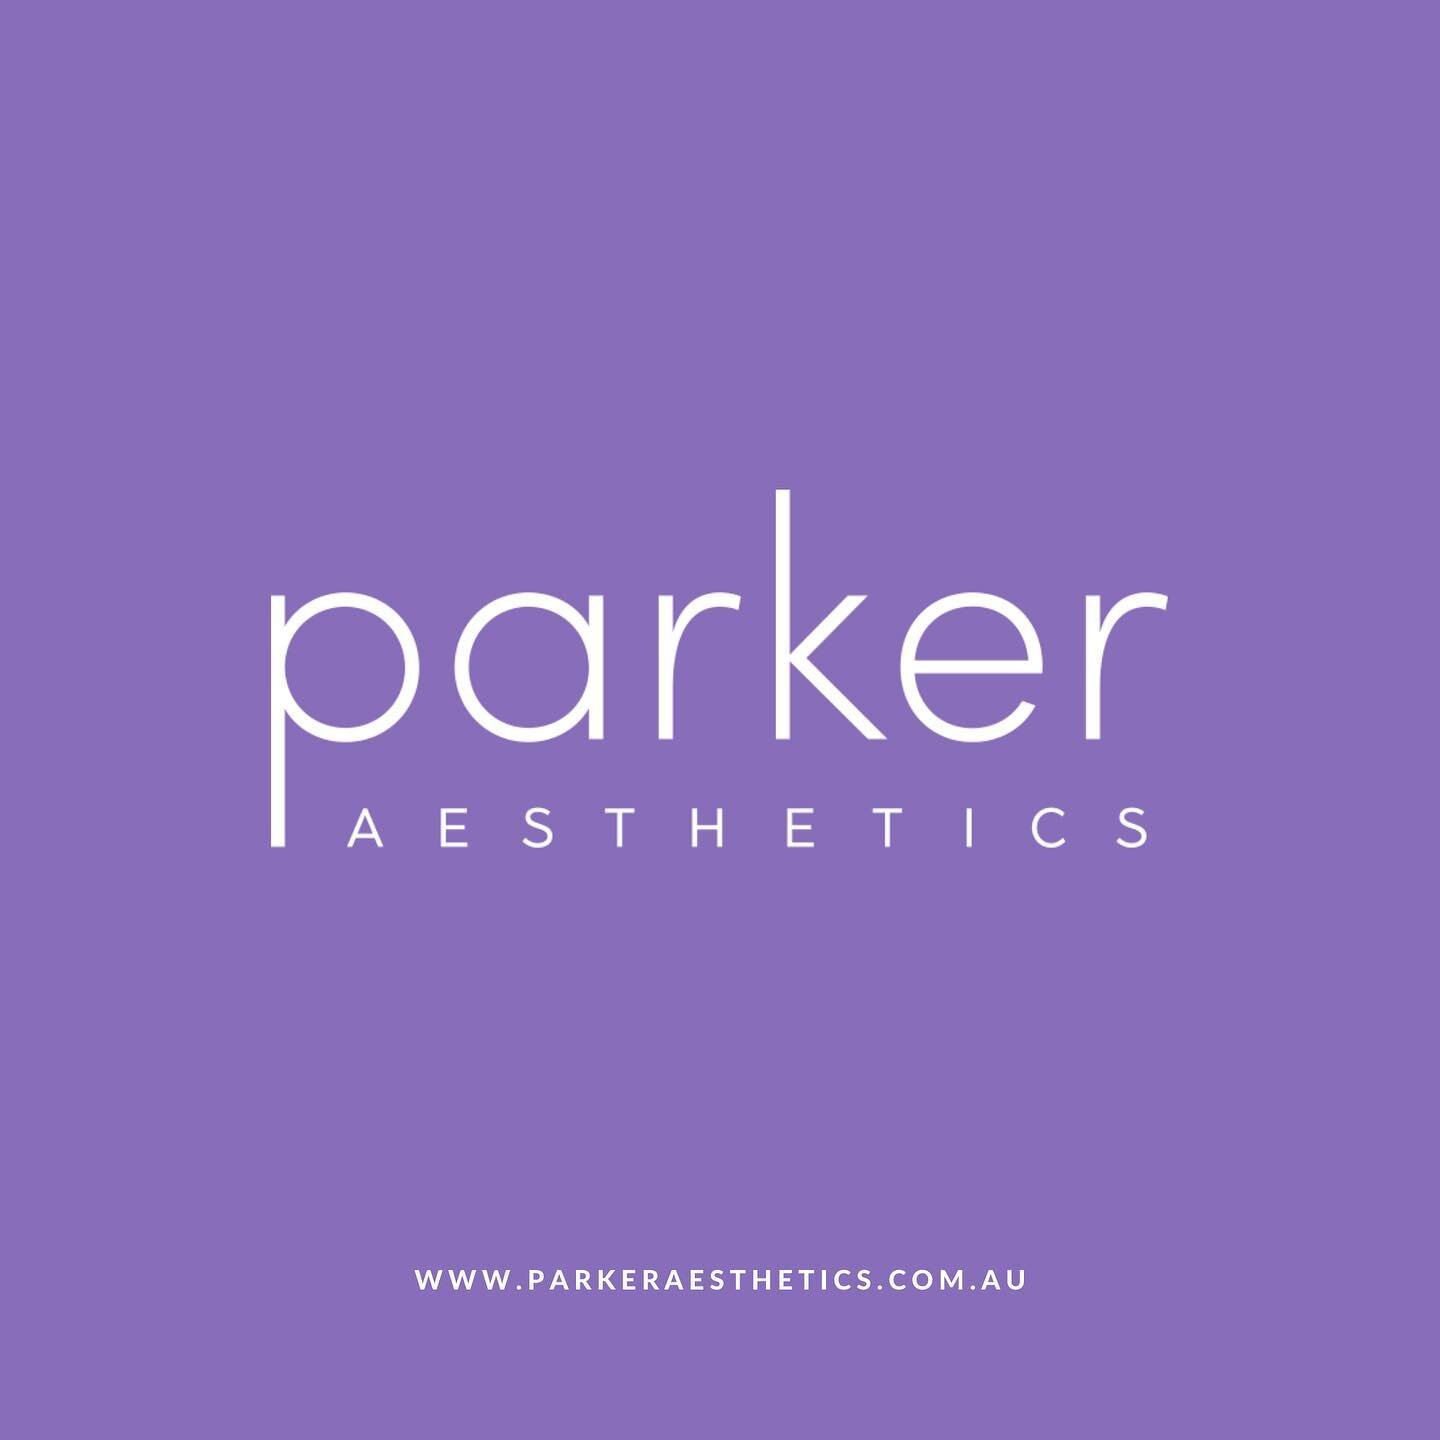 Parker Aesthetics PERTH:

We are now safely able and ready to return to Perth! 

Dr Chiara will be taking clinics in Perth from 8th-14th March. 

Please book ASAP to ensure you get an appointment because we foresee that with the backlog from our last